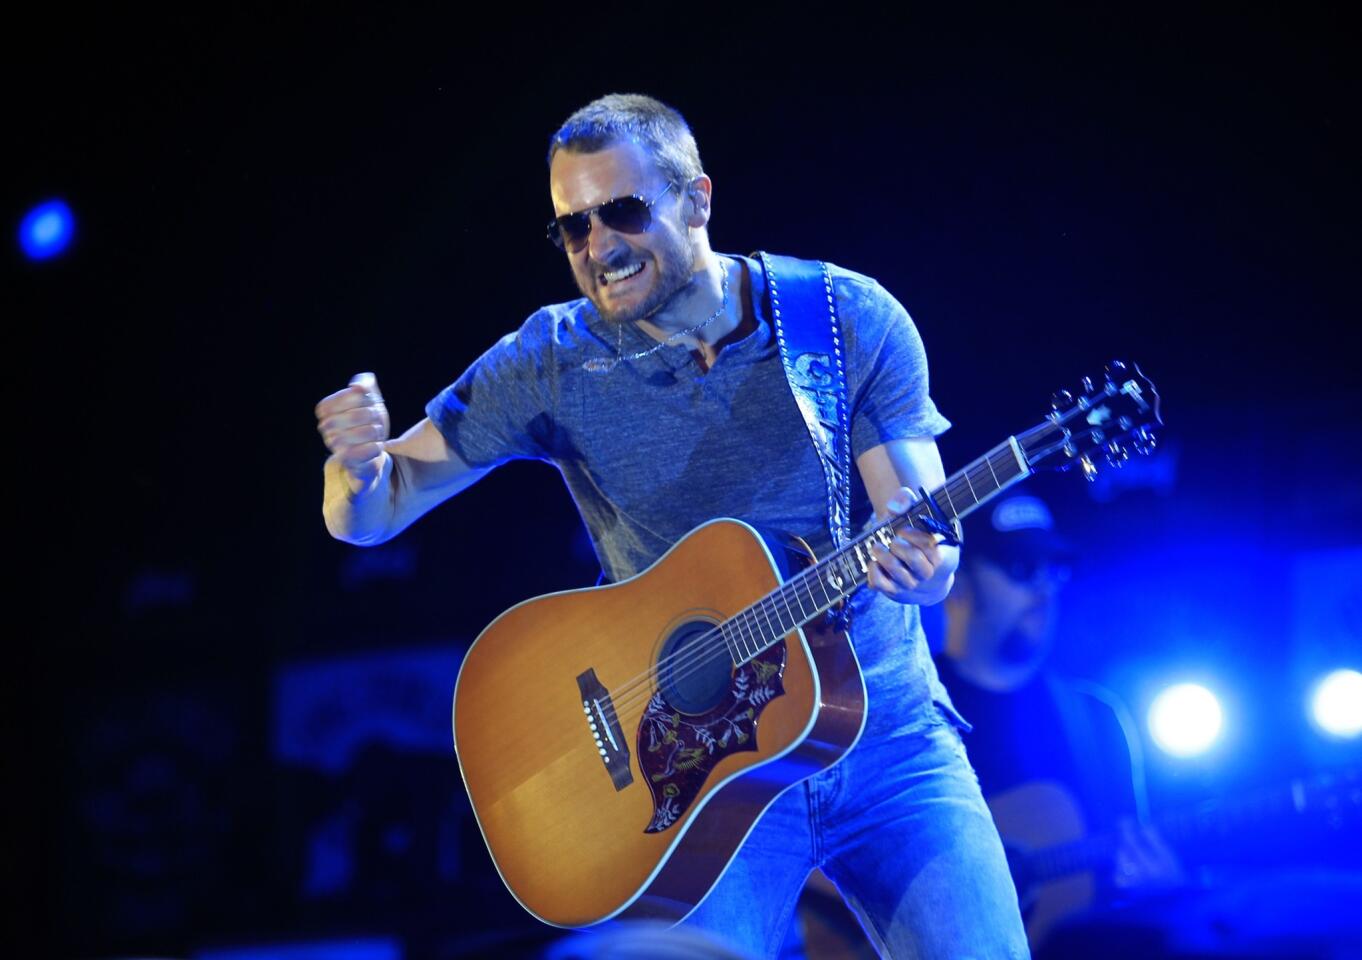 Friday's headliner, Eric Church, performs on the Mane Stage.